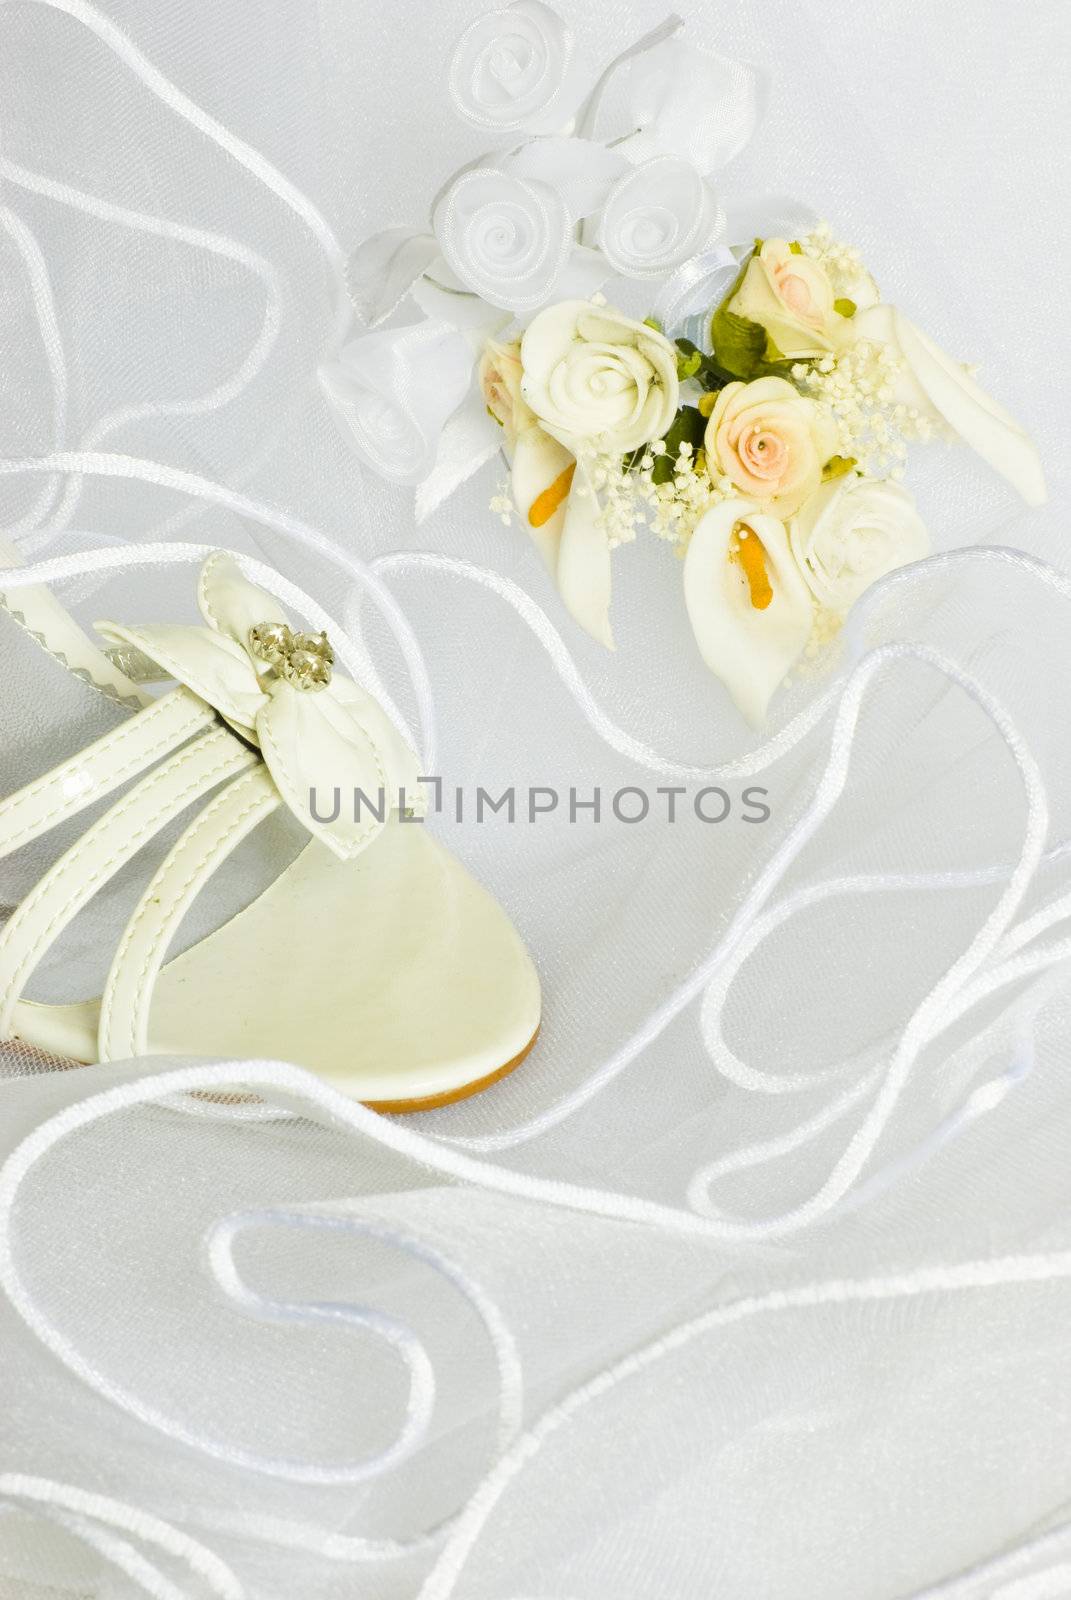 wedding sandals and flowers over veil by Dessie_bg